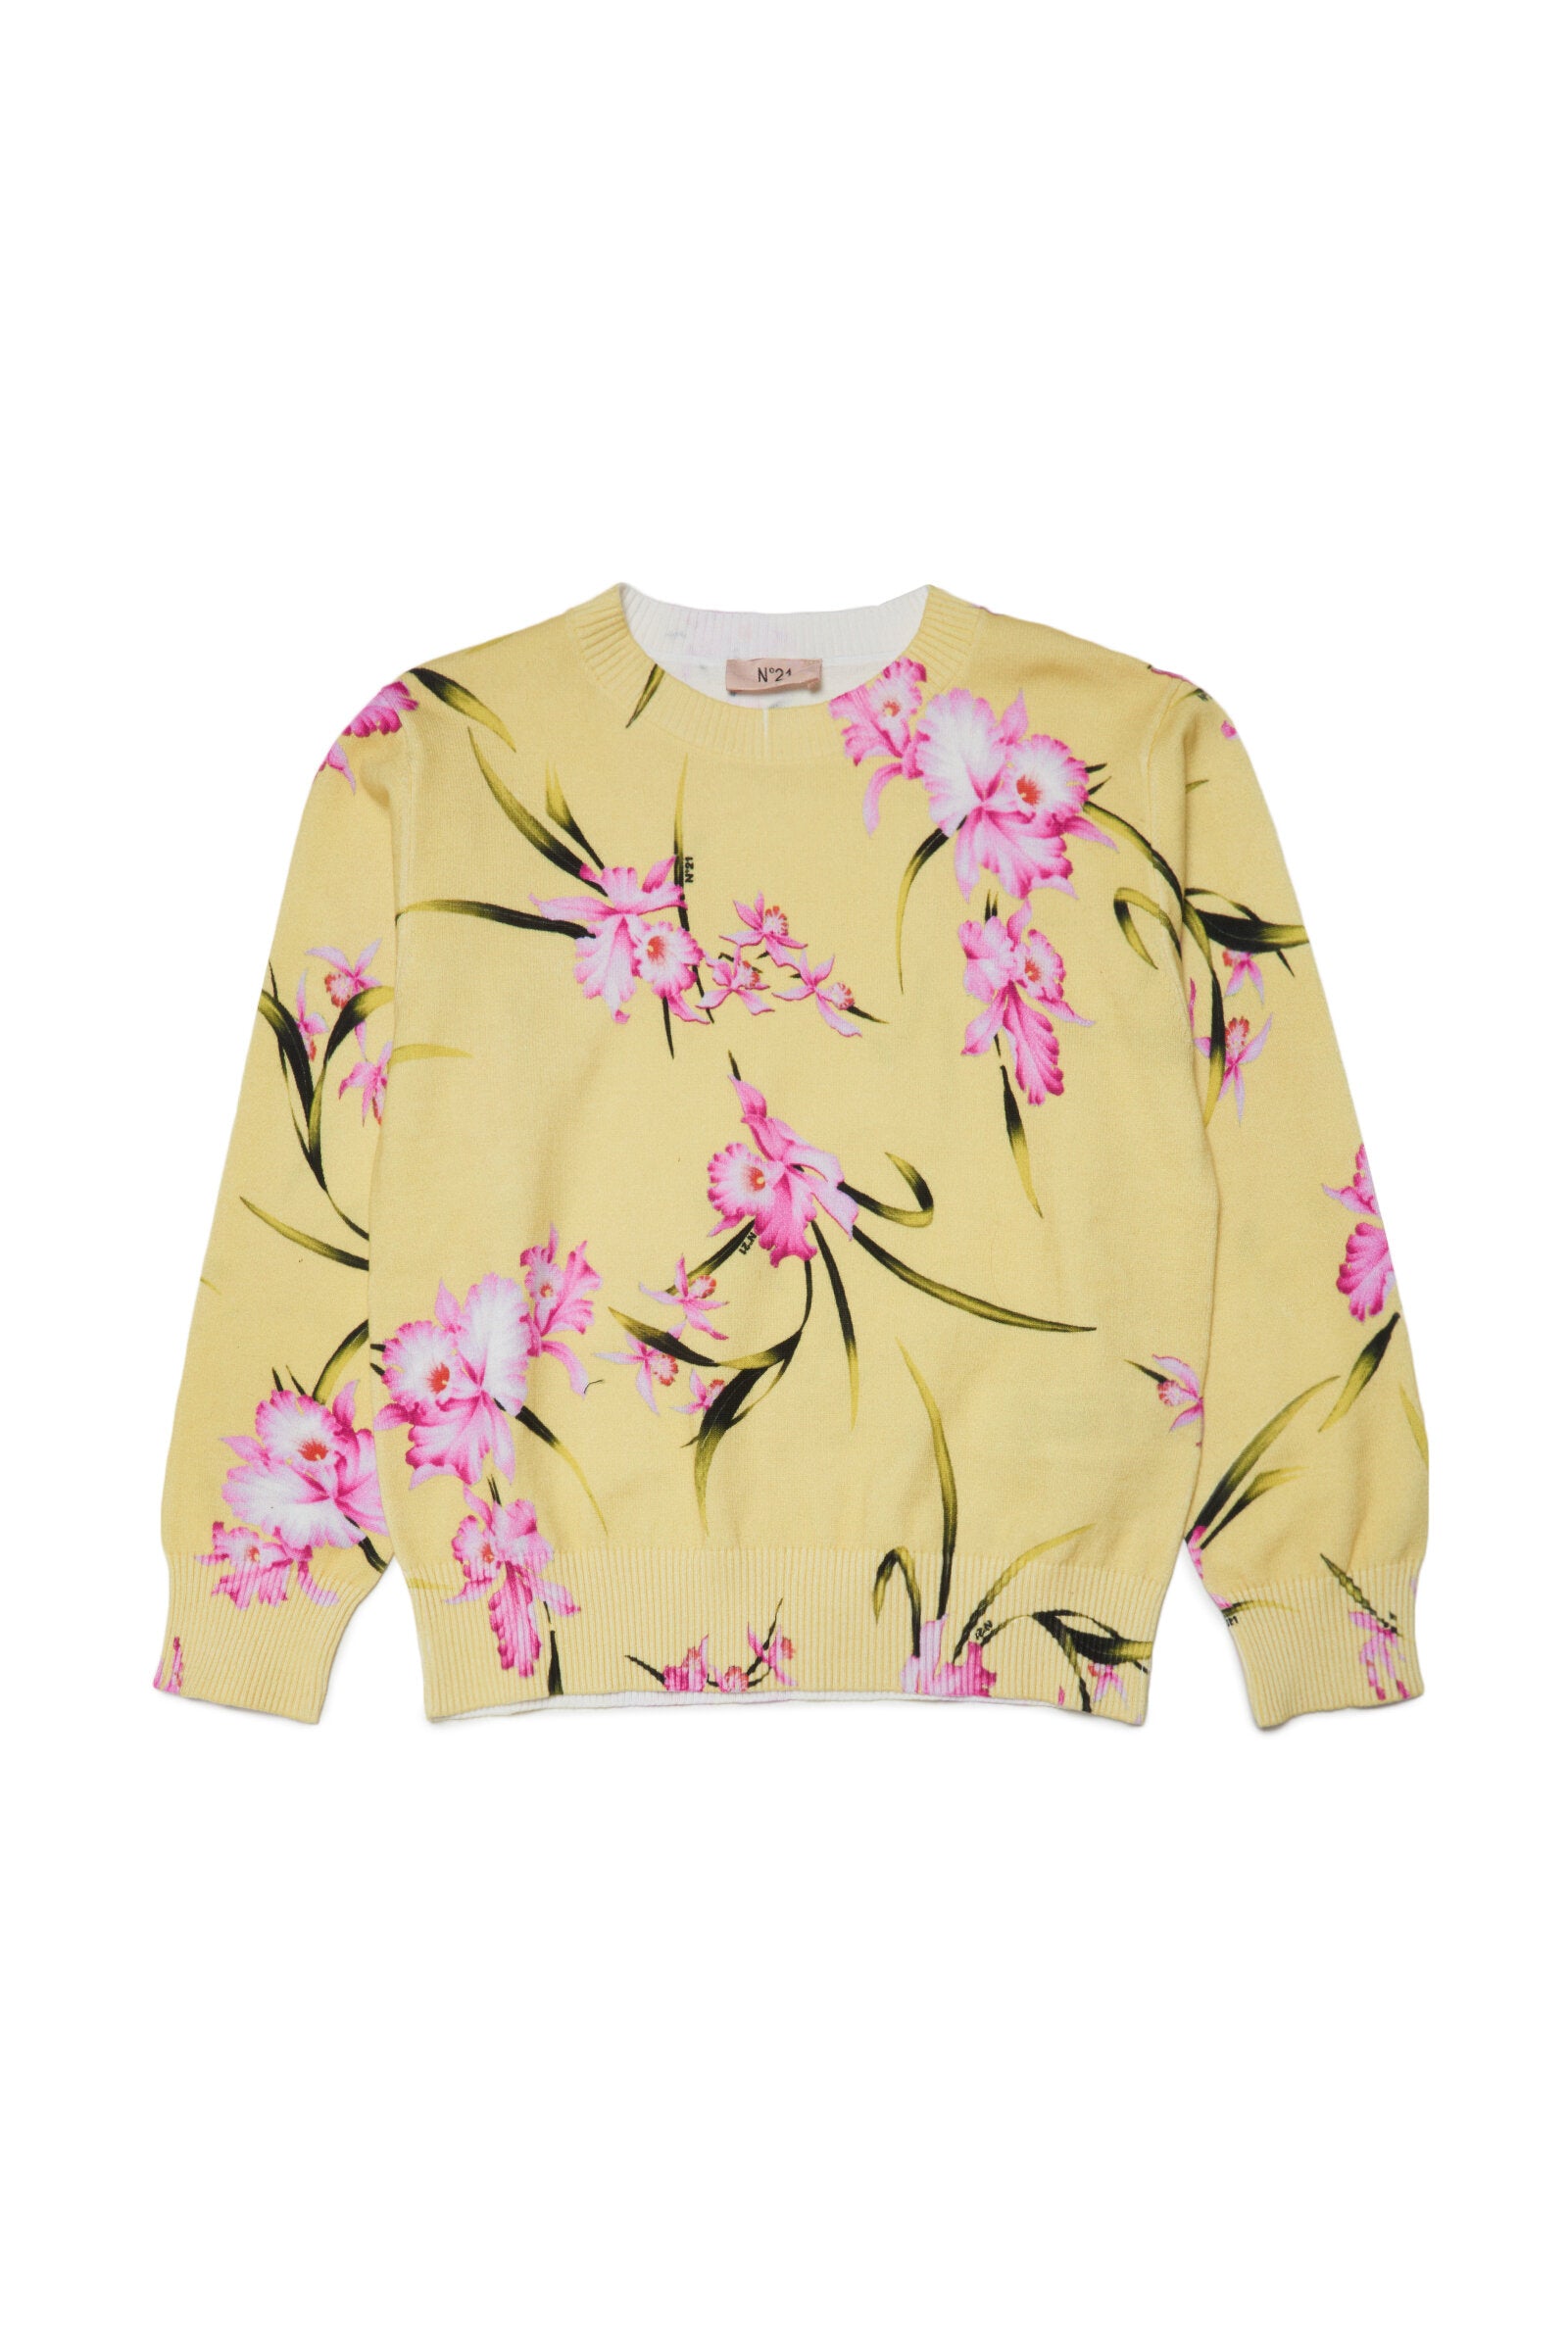 Yellow long-sleeved cotton sweater with floral print